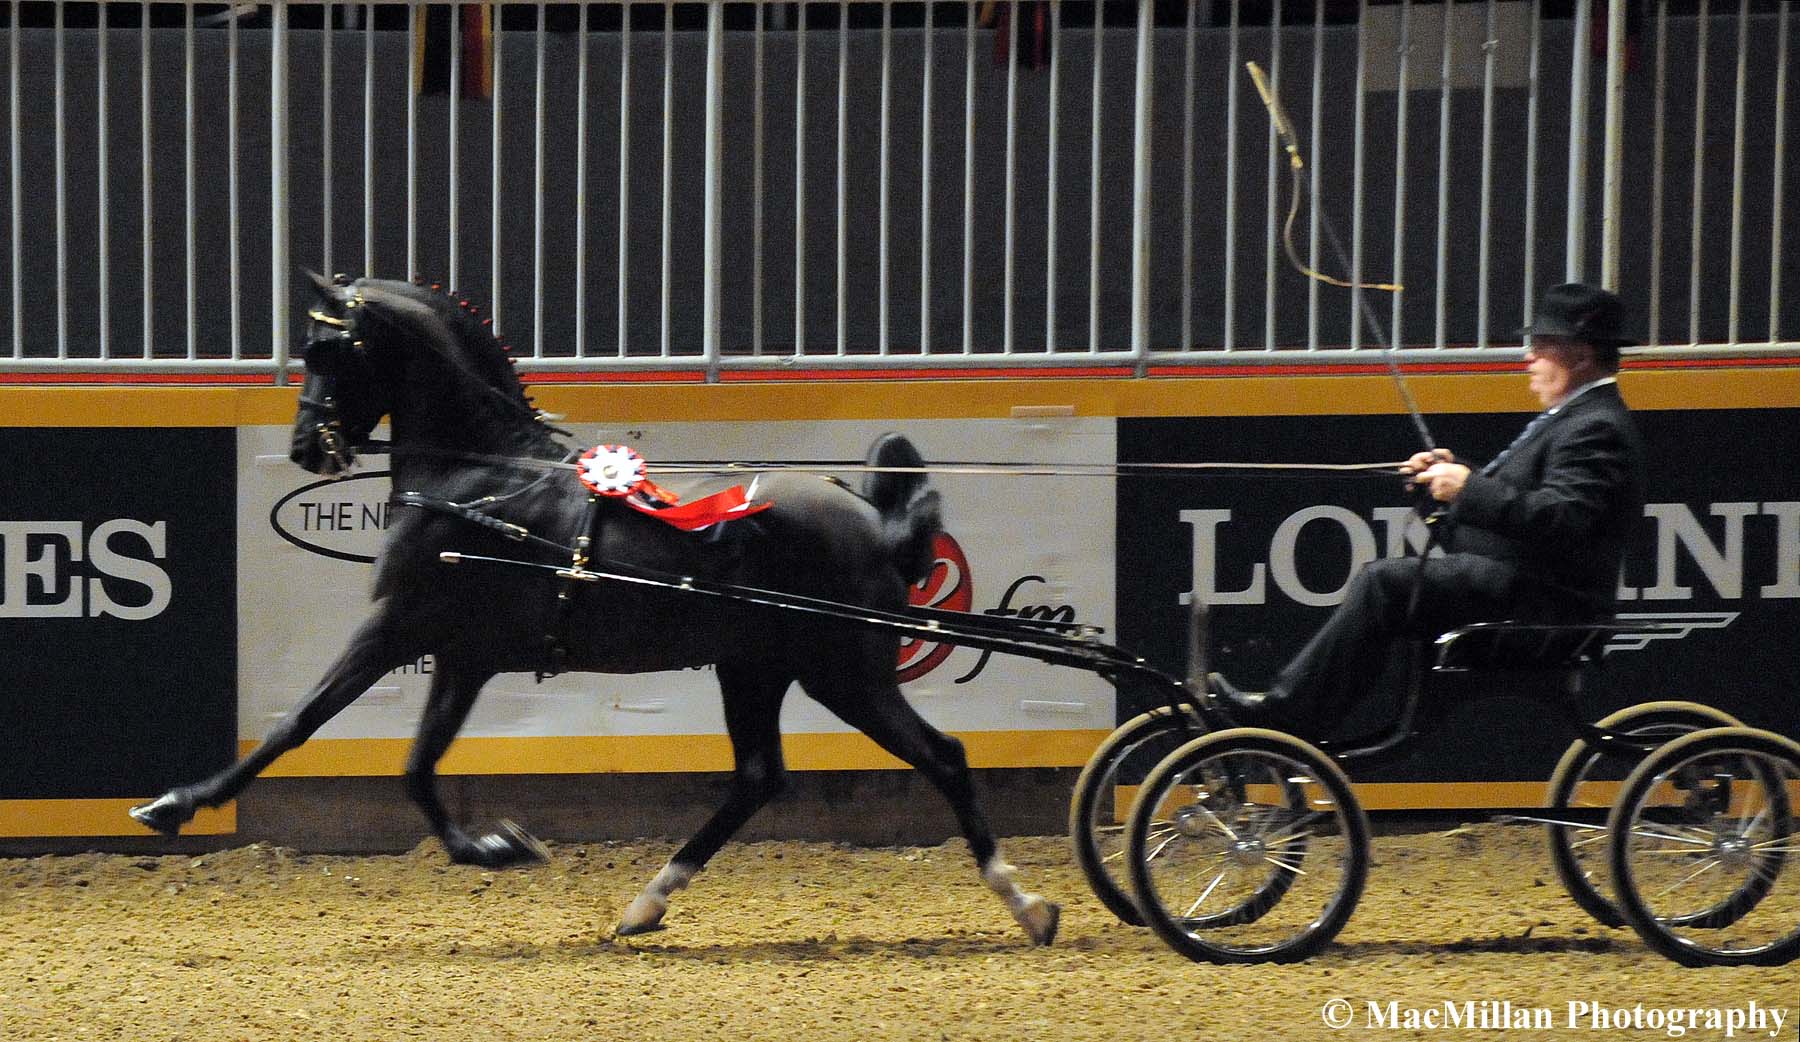 Photo 24 - The Spiderman driven by Rodney Hicks and owned by Edward Ochsenschlager took the top place in the Royal Horse Show Hackney Pony Canadian Championship Stake class. Photo by Kim MacMillan/MacMillan Photography